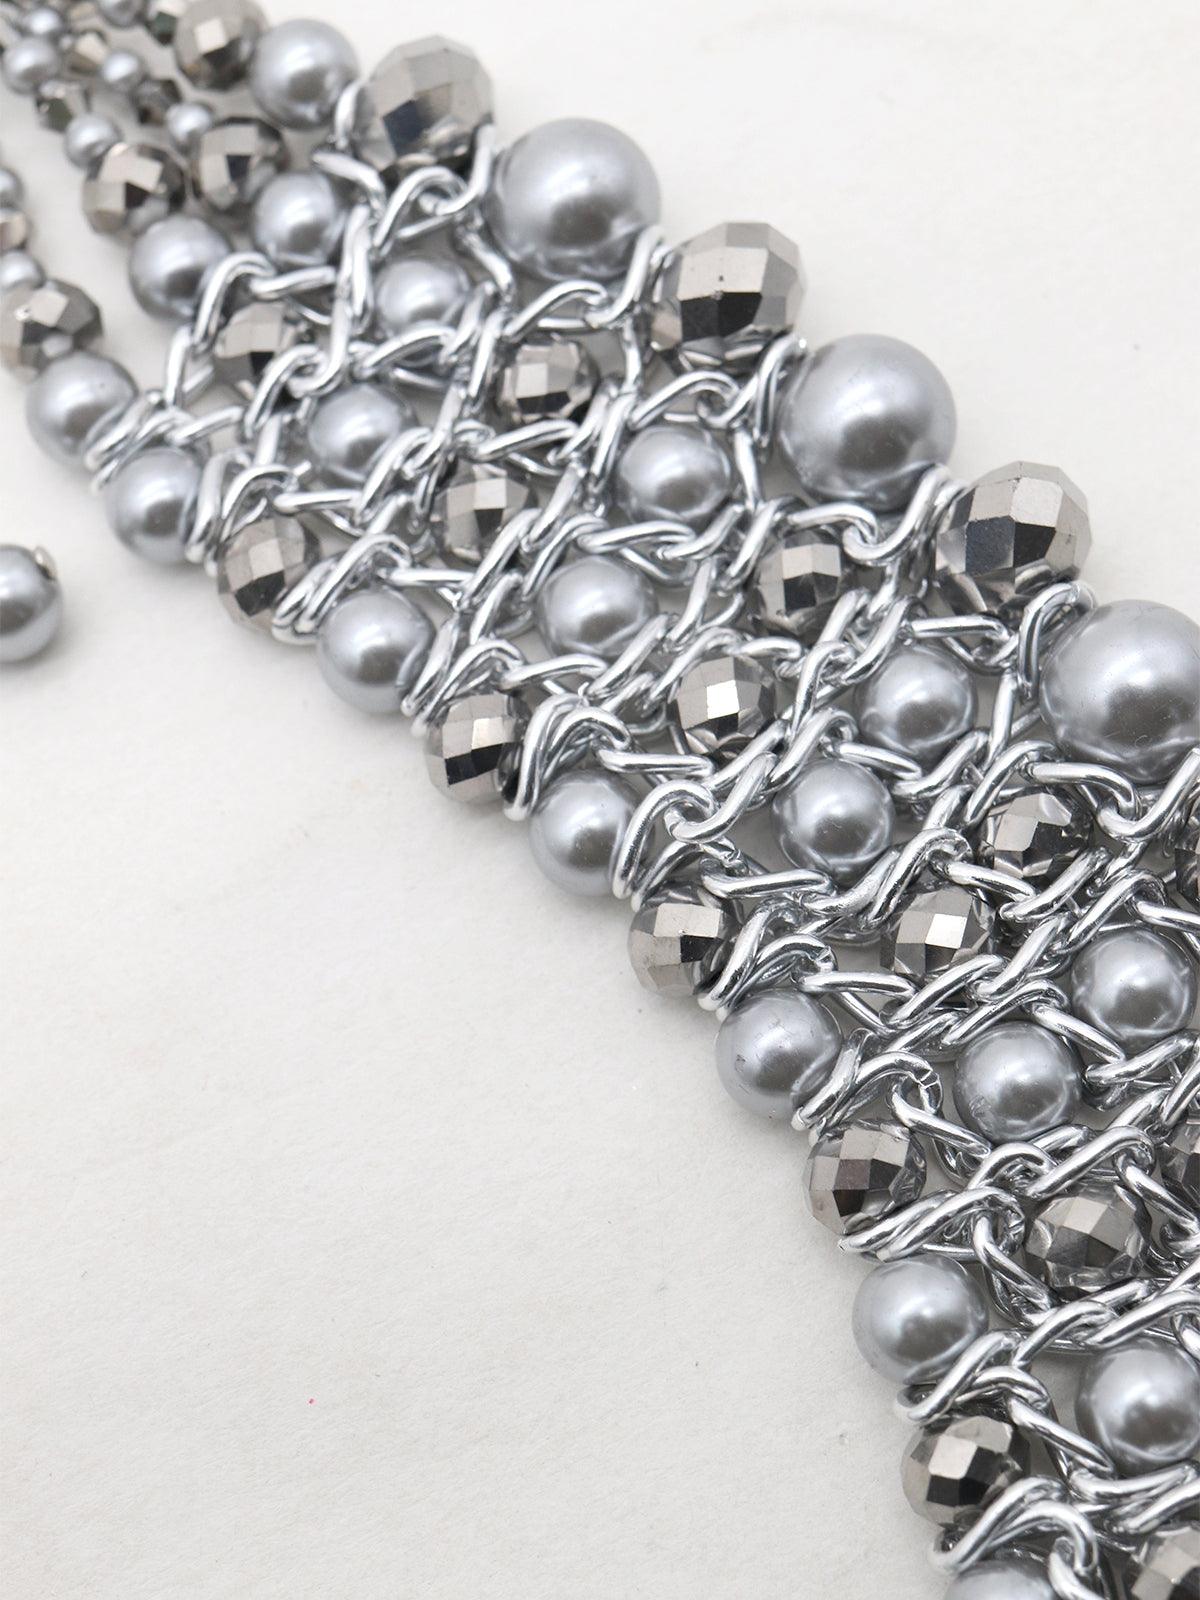 Women's Adorning Grey Pearl Necklace - Odette